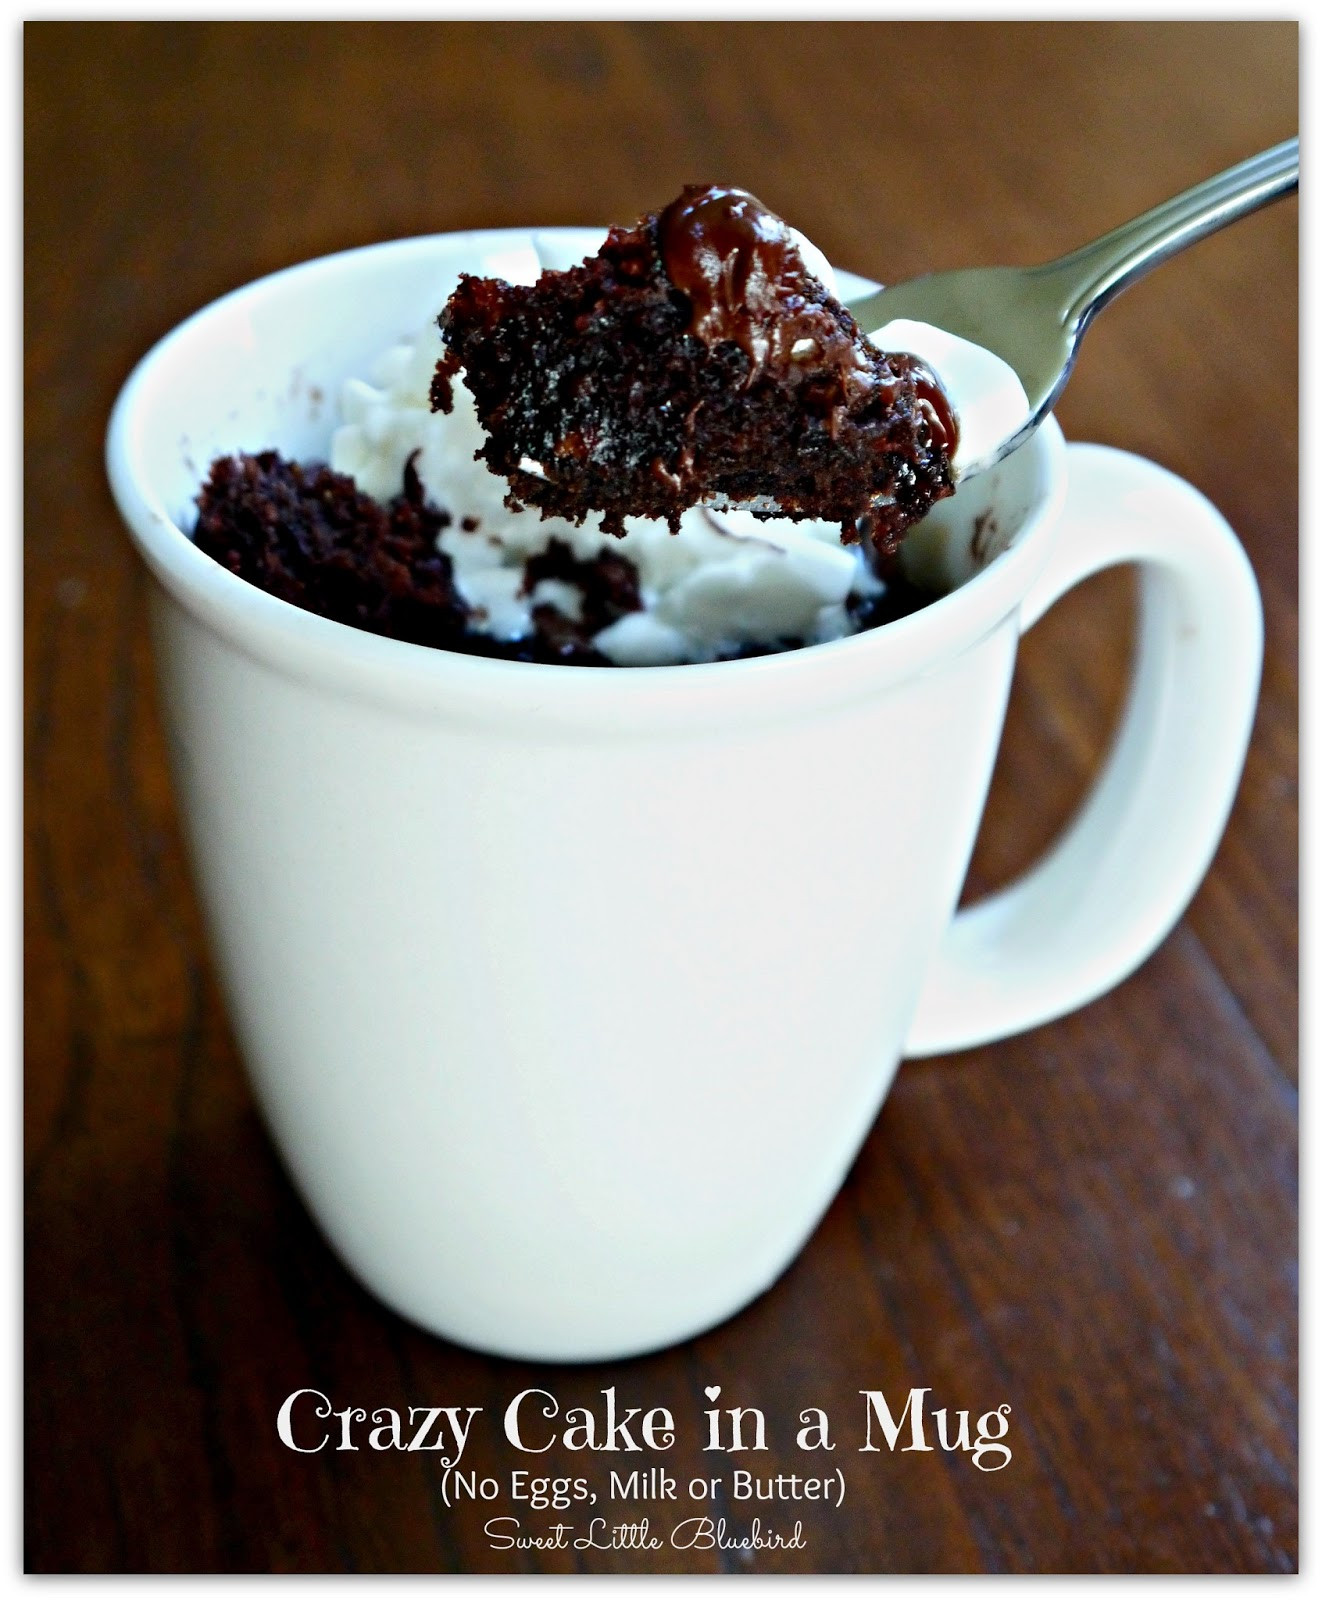 Mug Cake With Cake Mix And No Egg
 Crazy Cake in a Mug No Eggs Milk or Butter Ready in